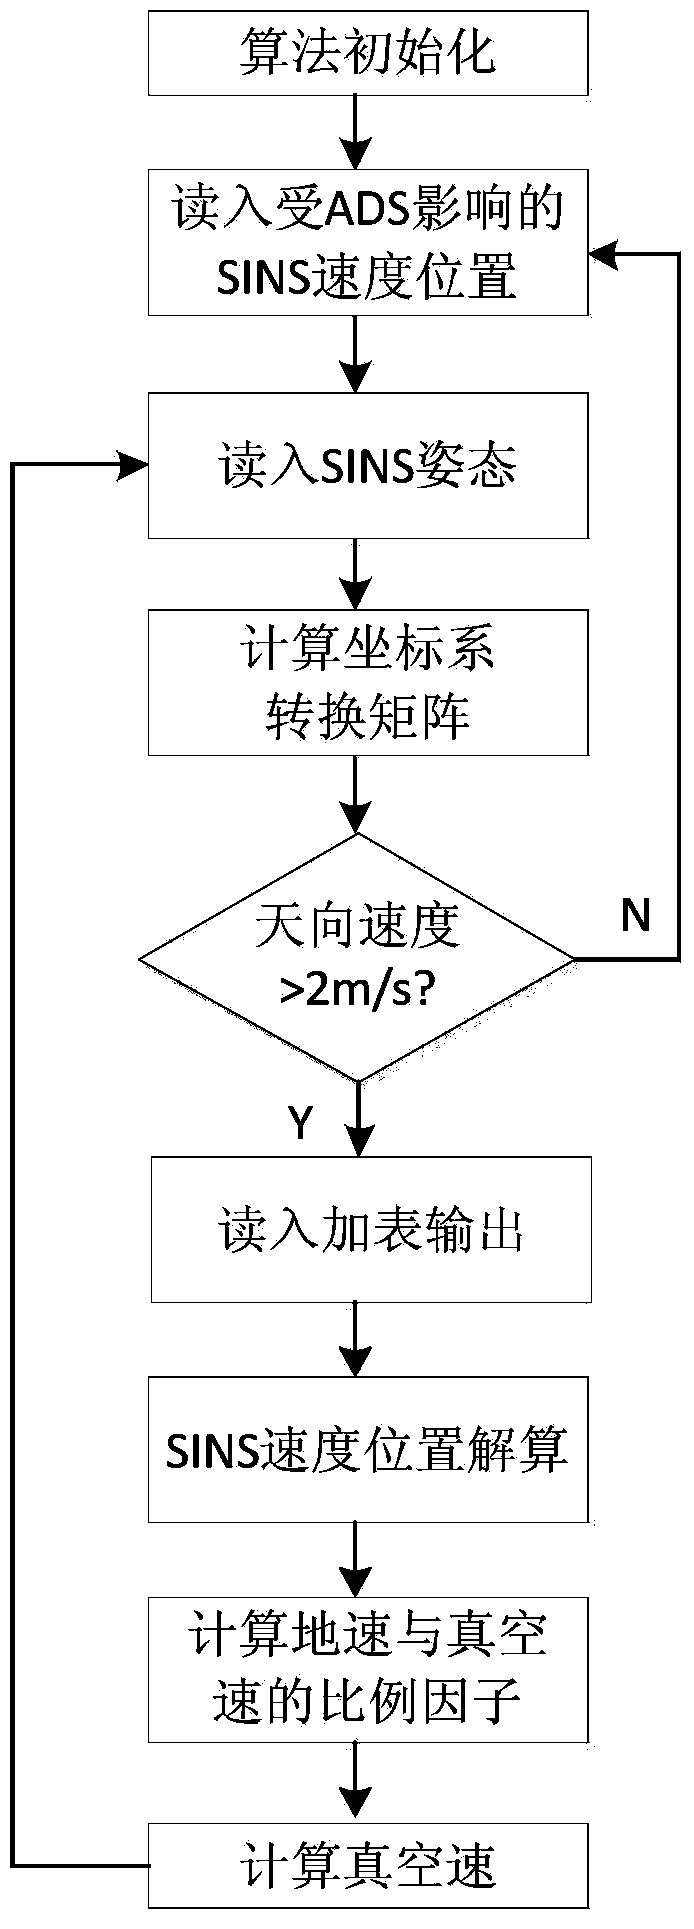 Vacuum speed resolving method for air data/serial inertial navigation combined navigation system